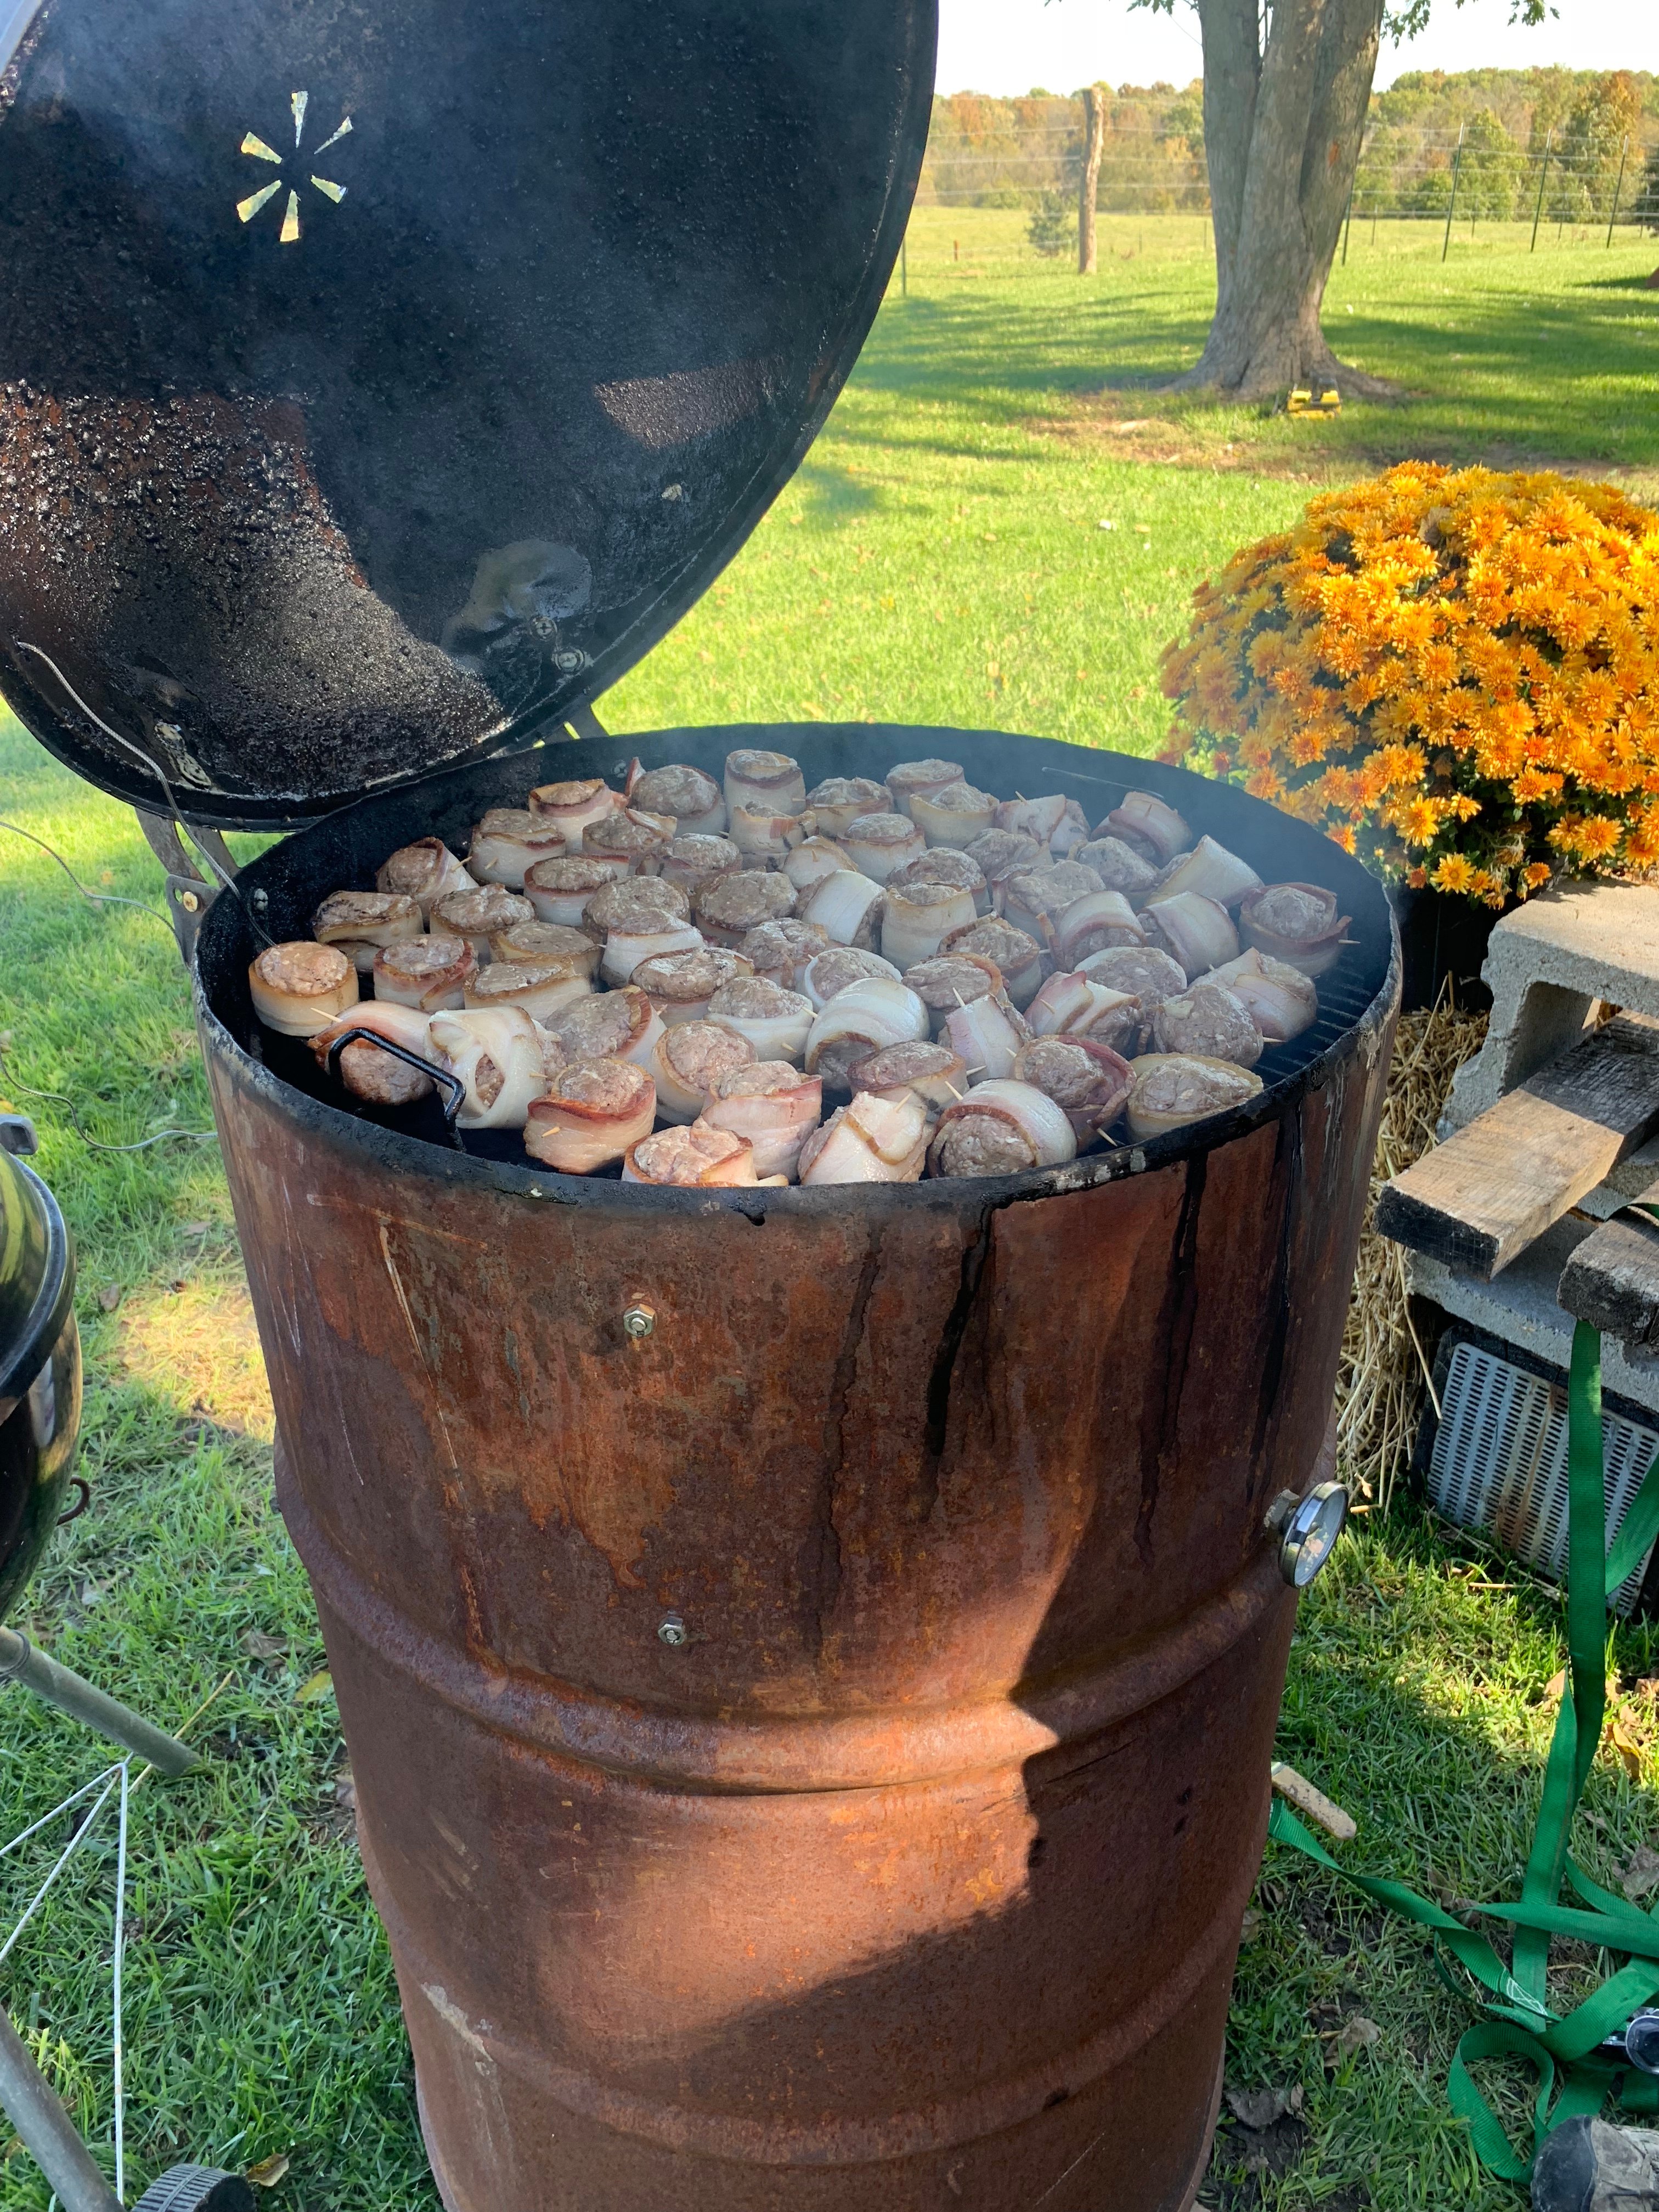 Moink balls on the smoker